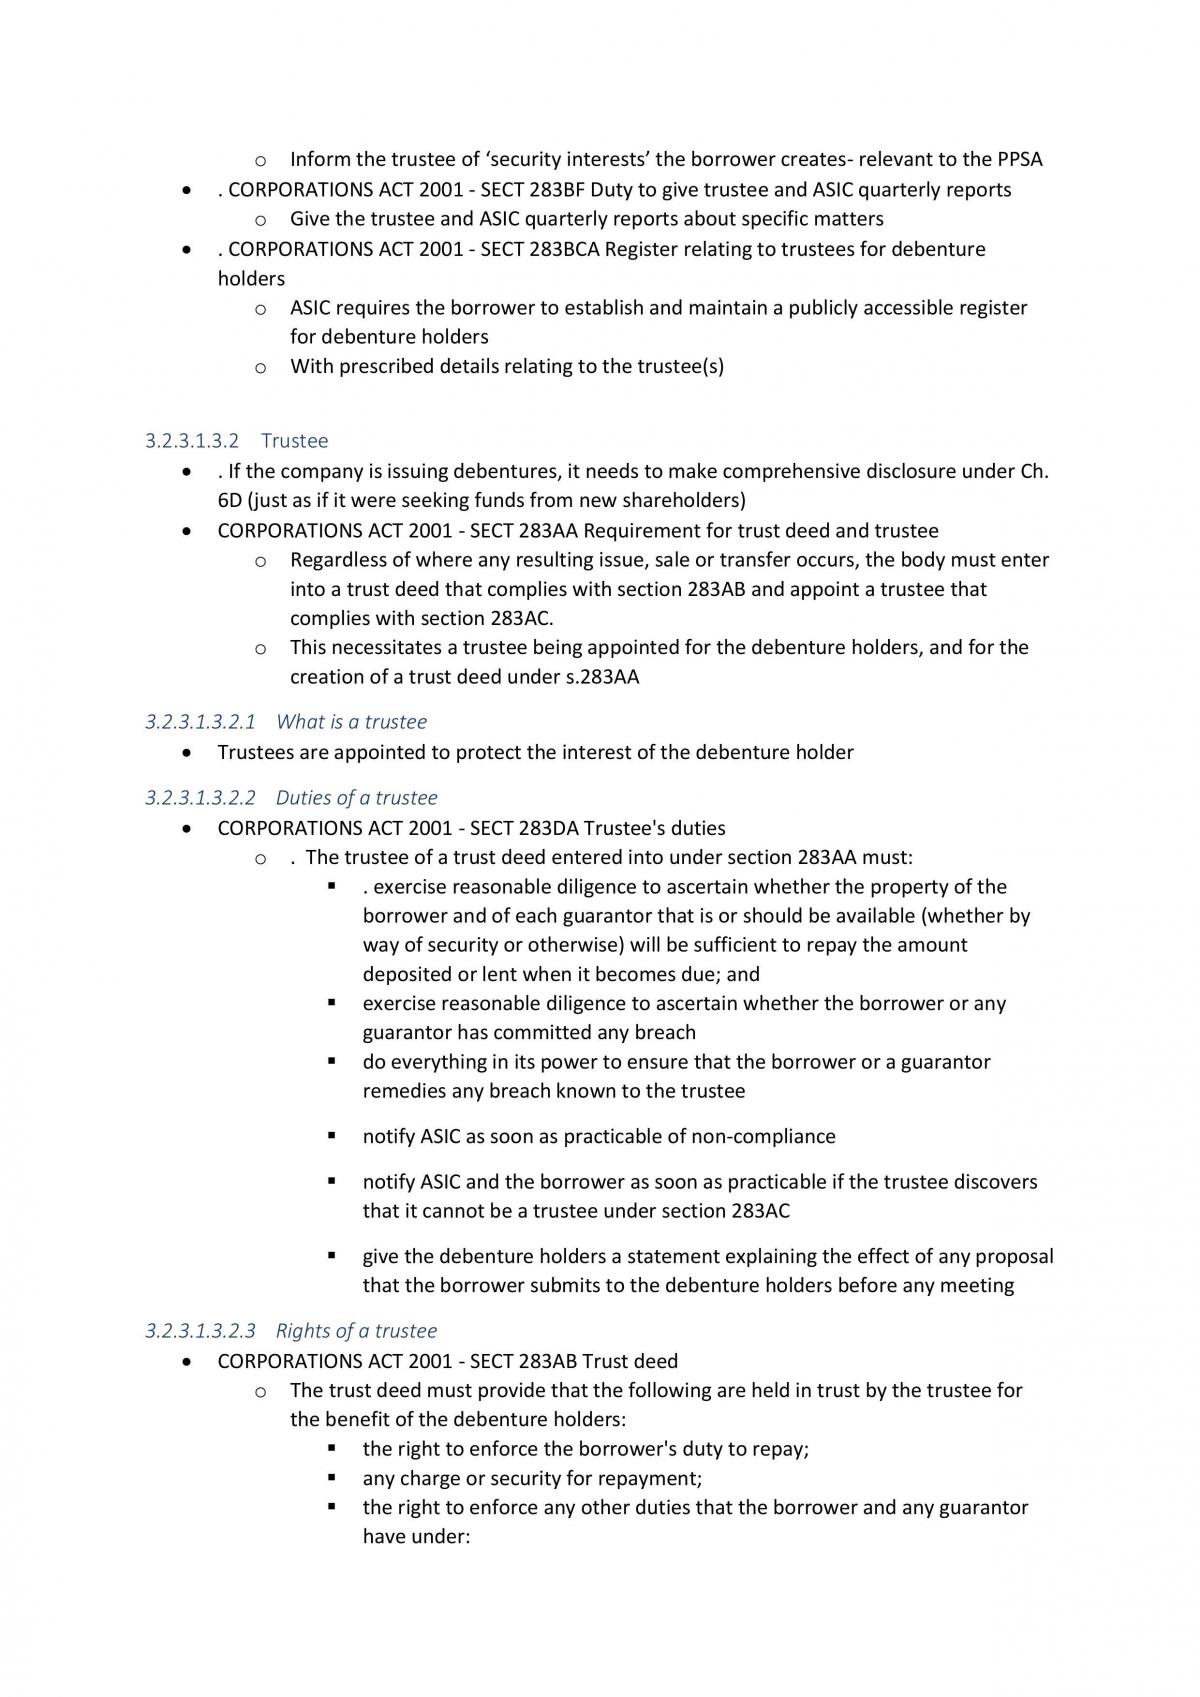 Corporations Law 2 Full Notes - Page 25